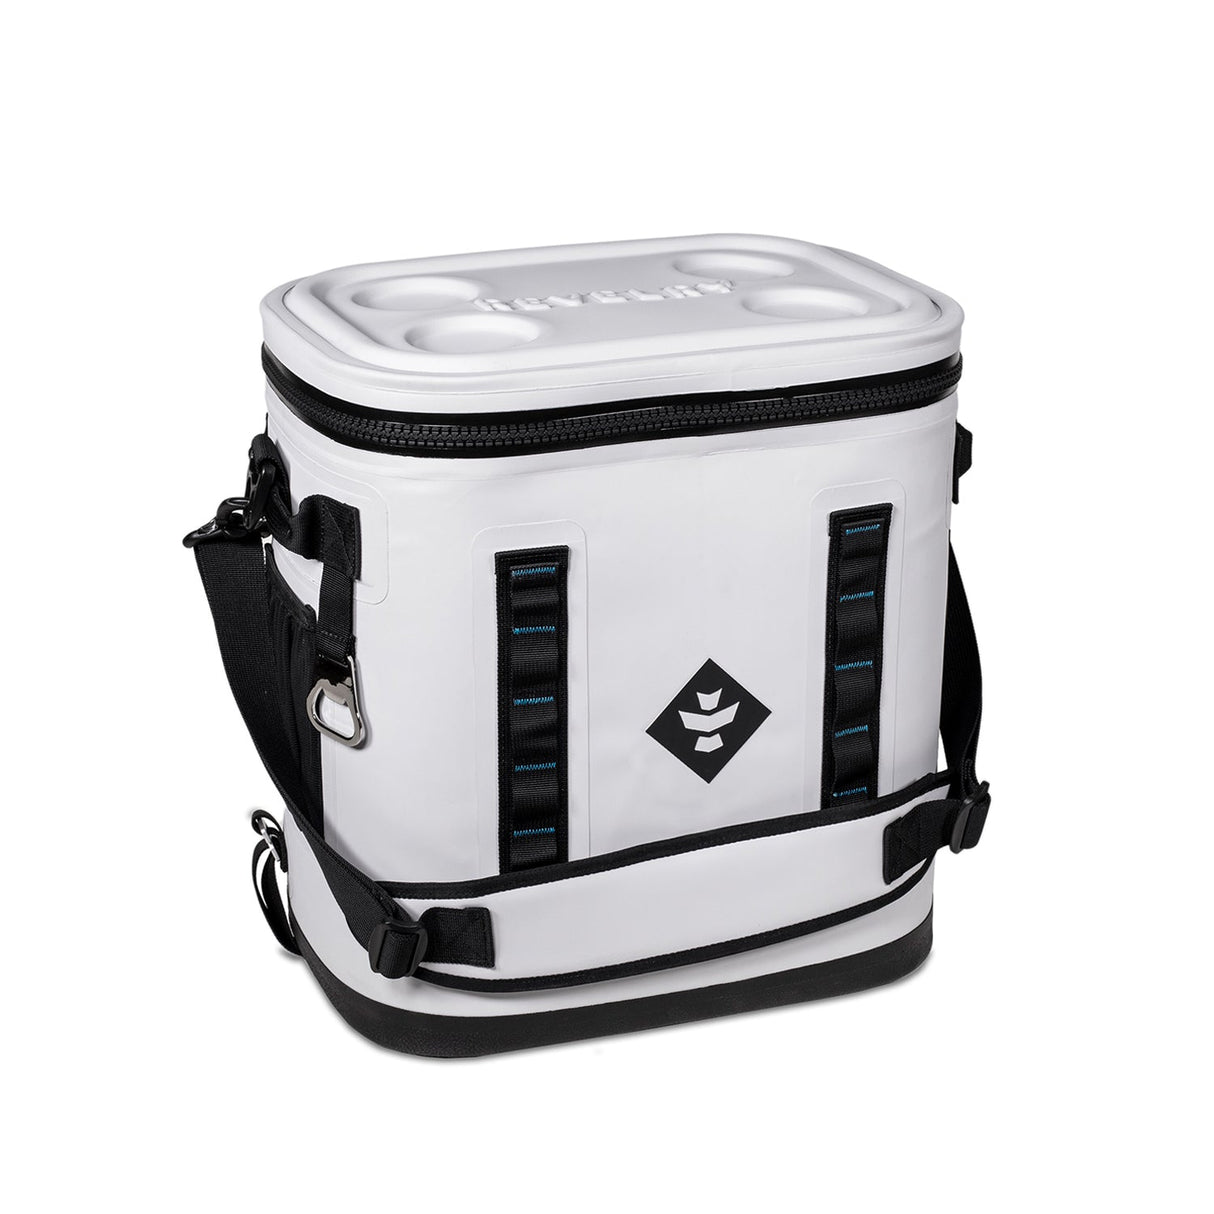 Revelry The Nomad 24 Watertight Cooler